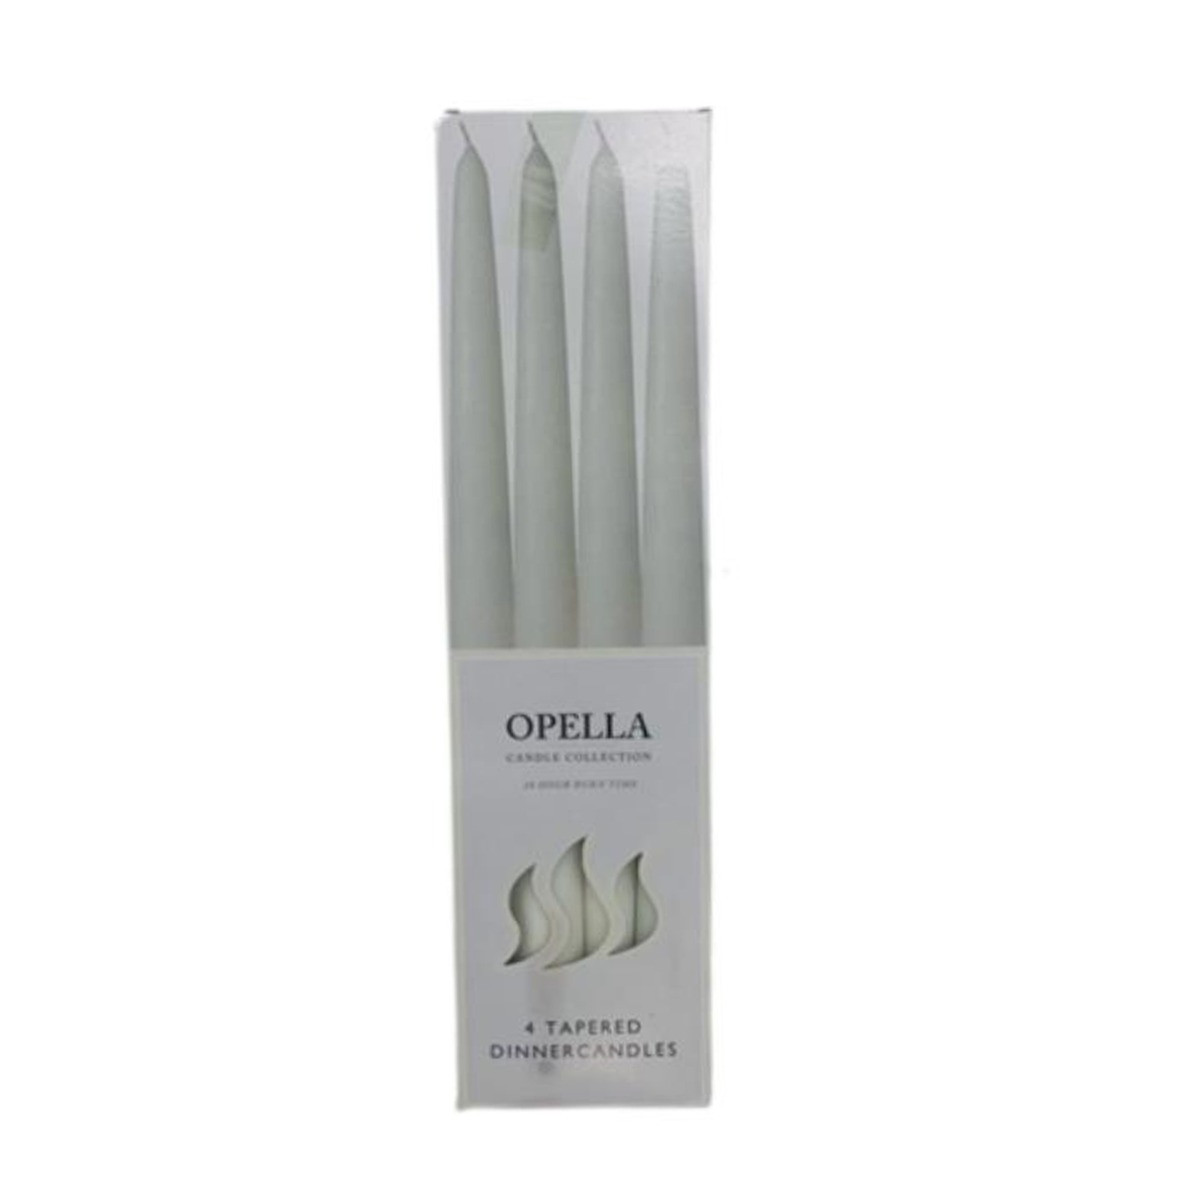 Opella Tapered Dinner Candles 4 Pack - White>